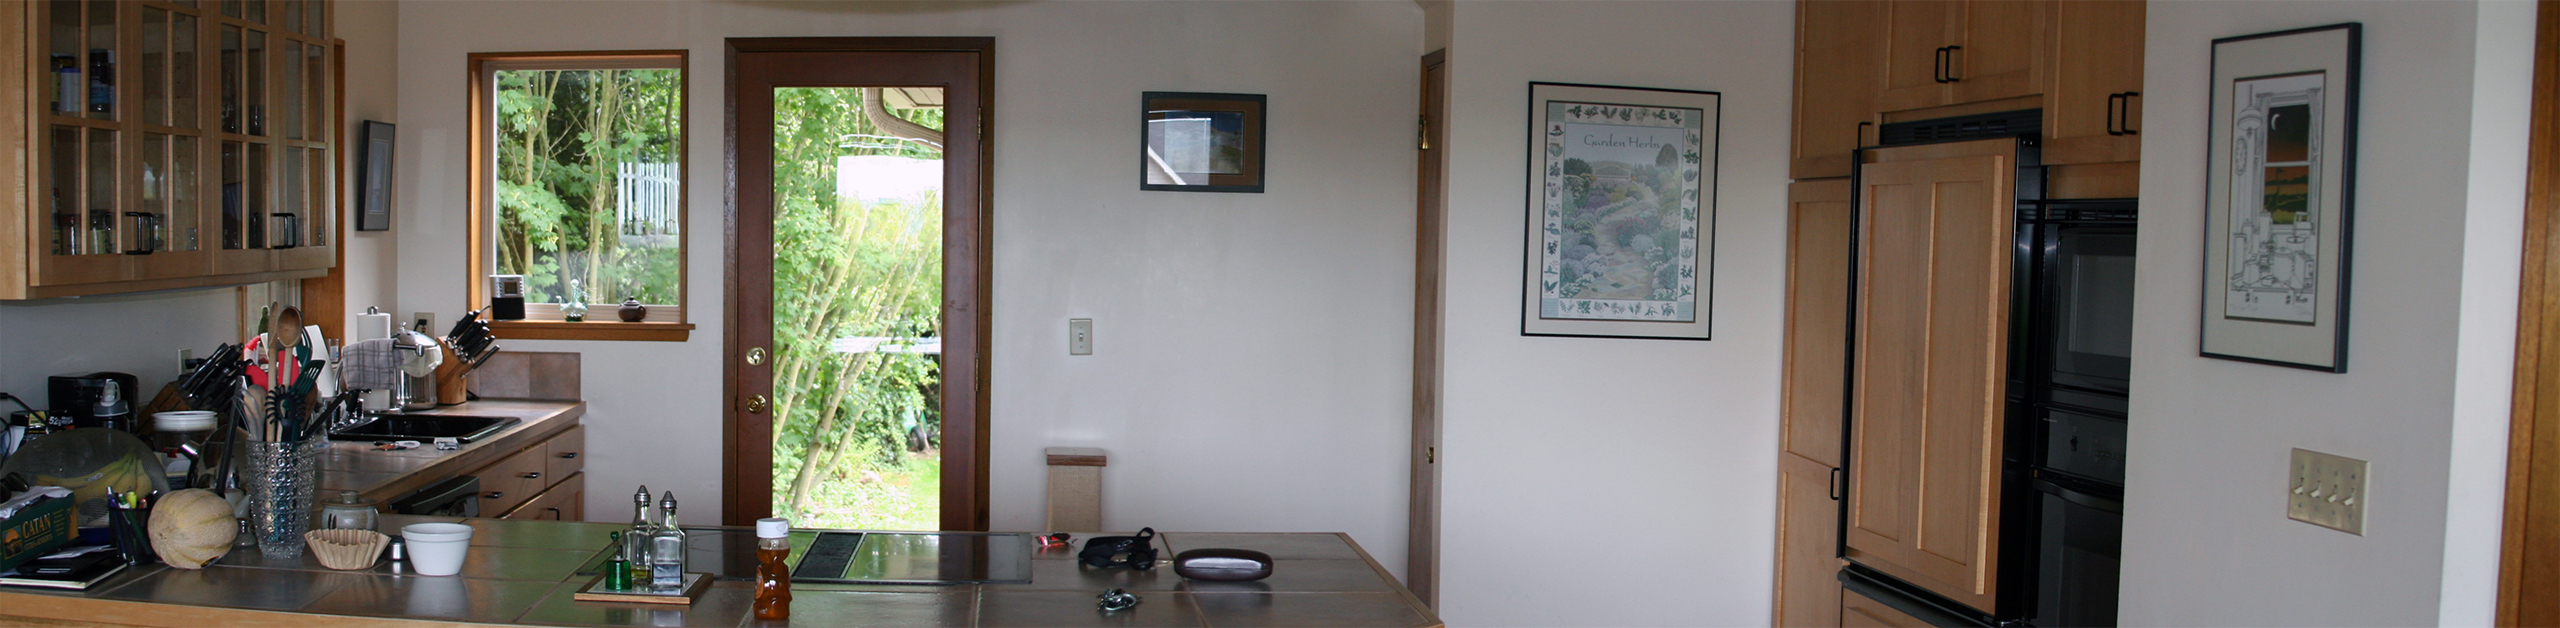 92nd Street Remodel & Addition - Before and After Remodel Photos: View into the Kitchen from the Dining Room, Before